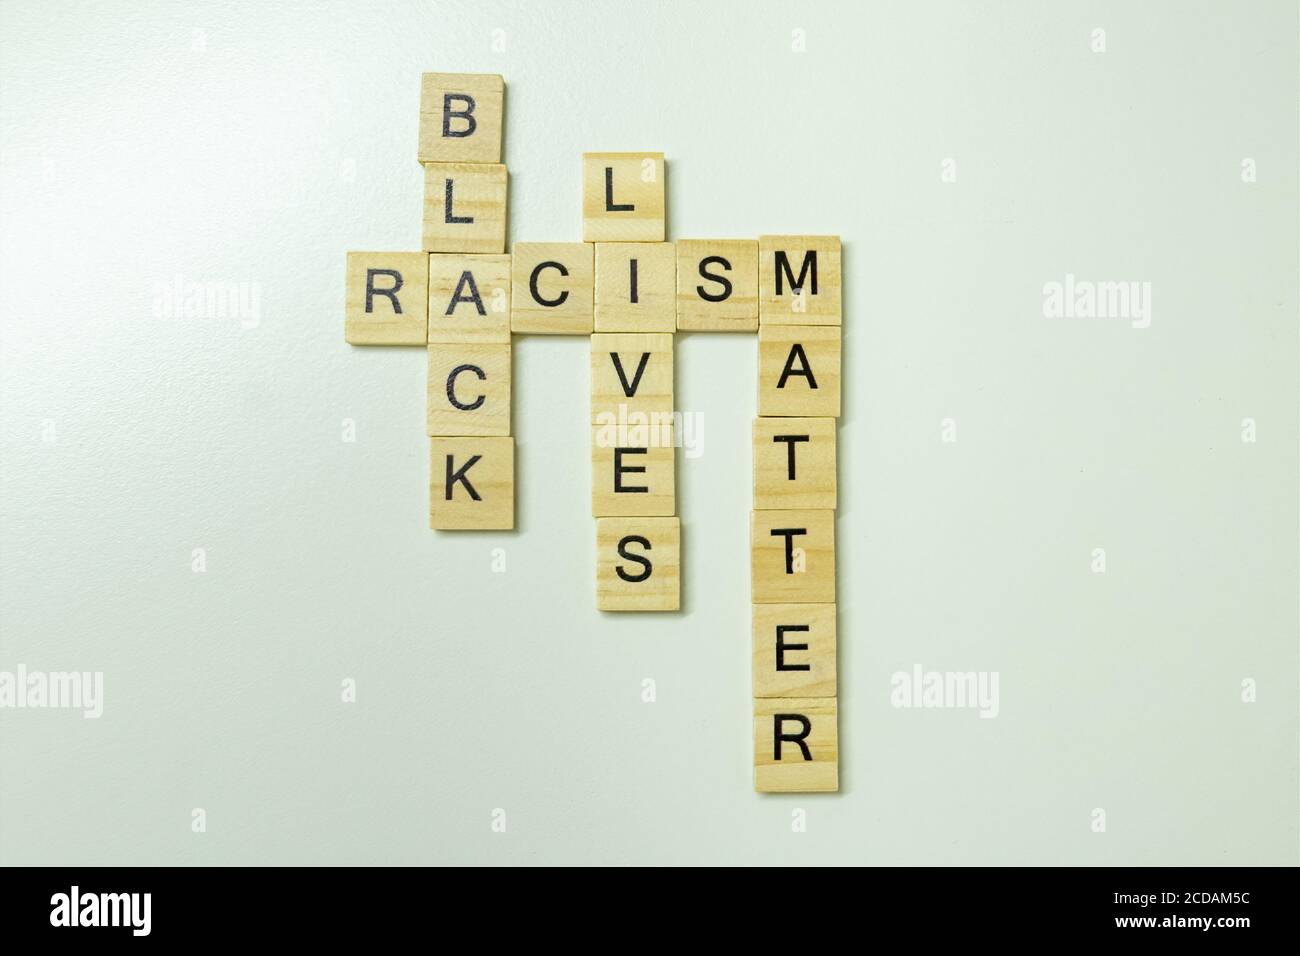 black lives matter slogan using scarab letters, protest against racism, equal rights concept Stock Photo